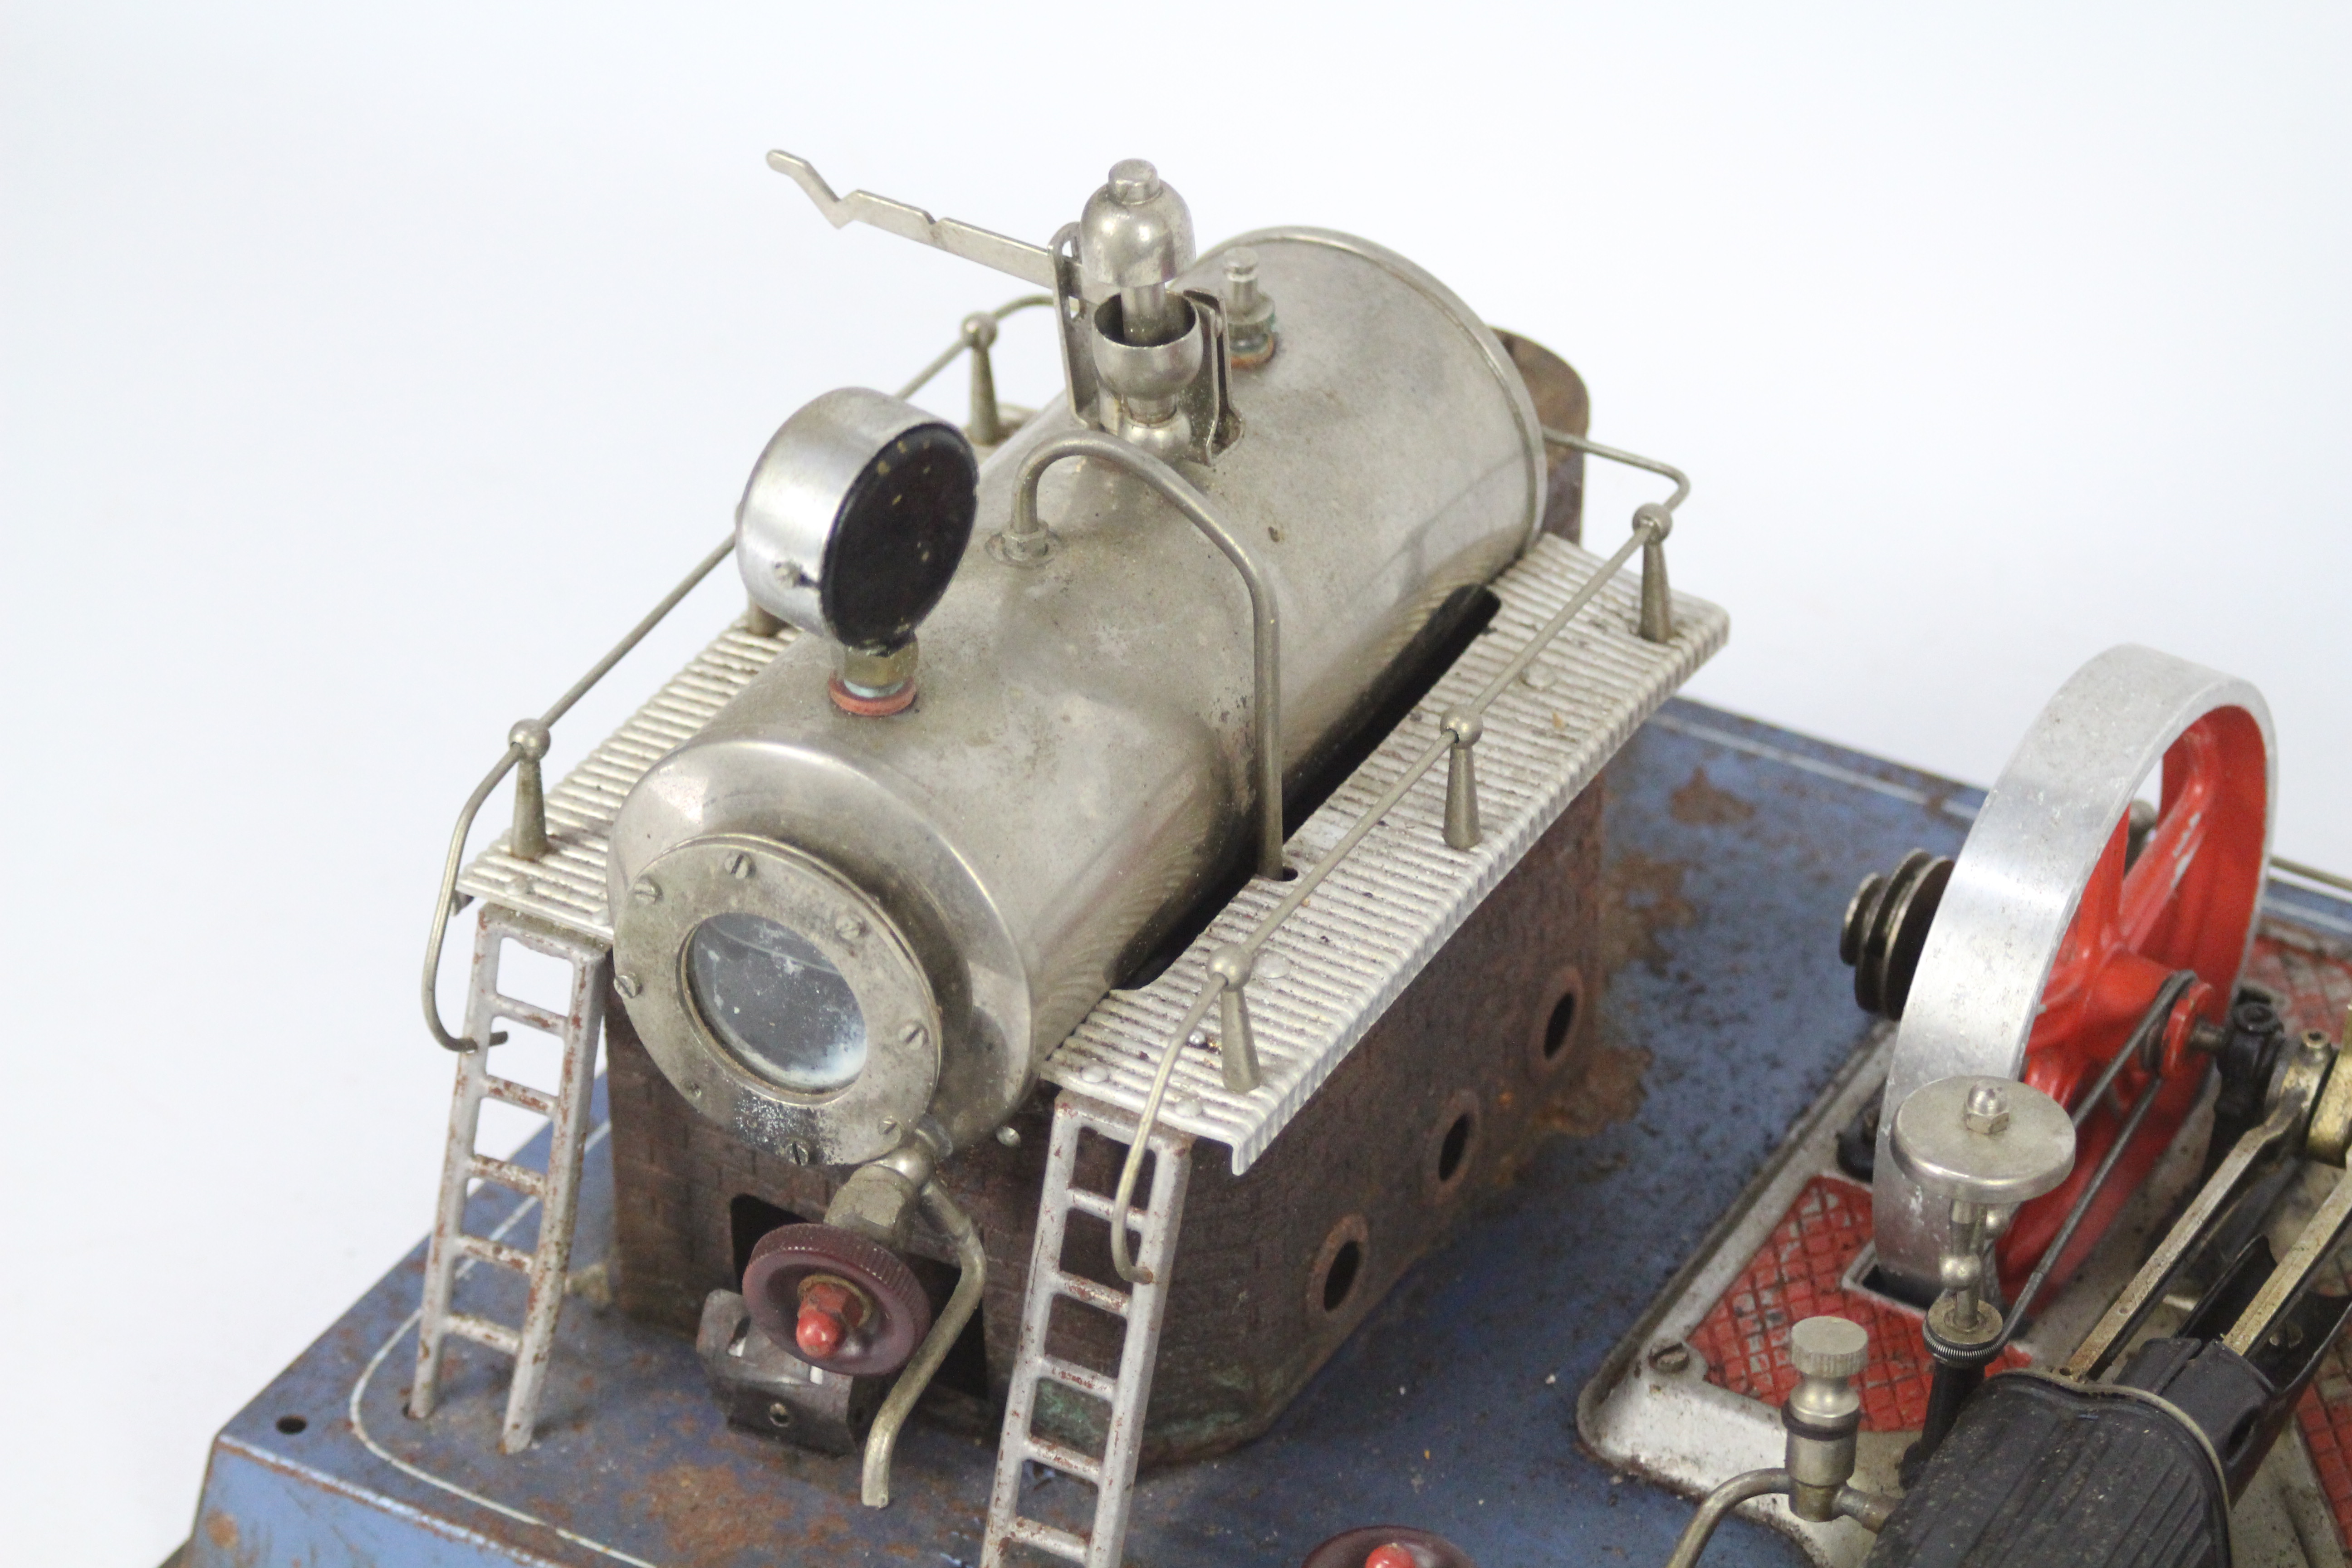 Wilesco, Mamod - Two static steam models. - Image 4 of 6